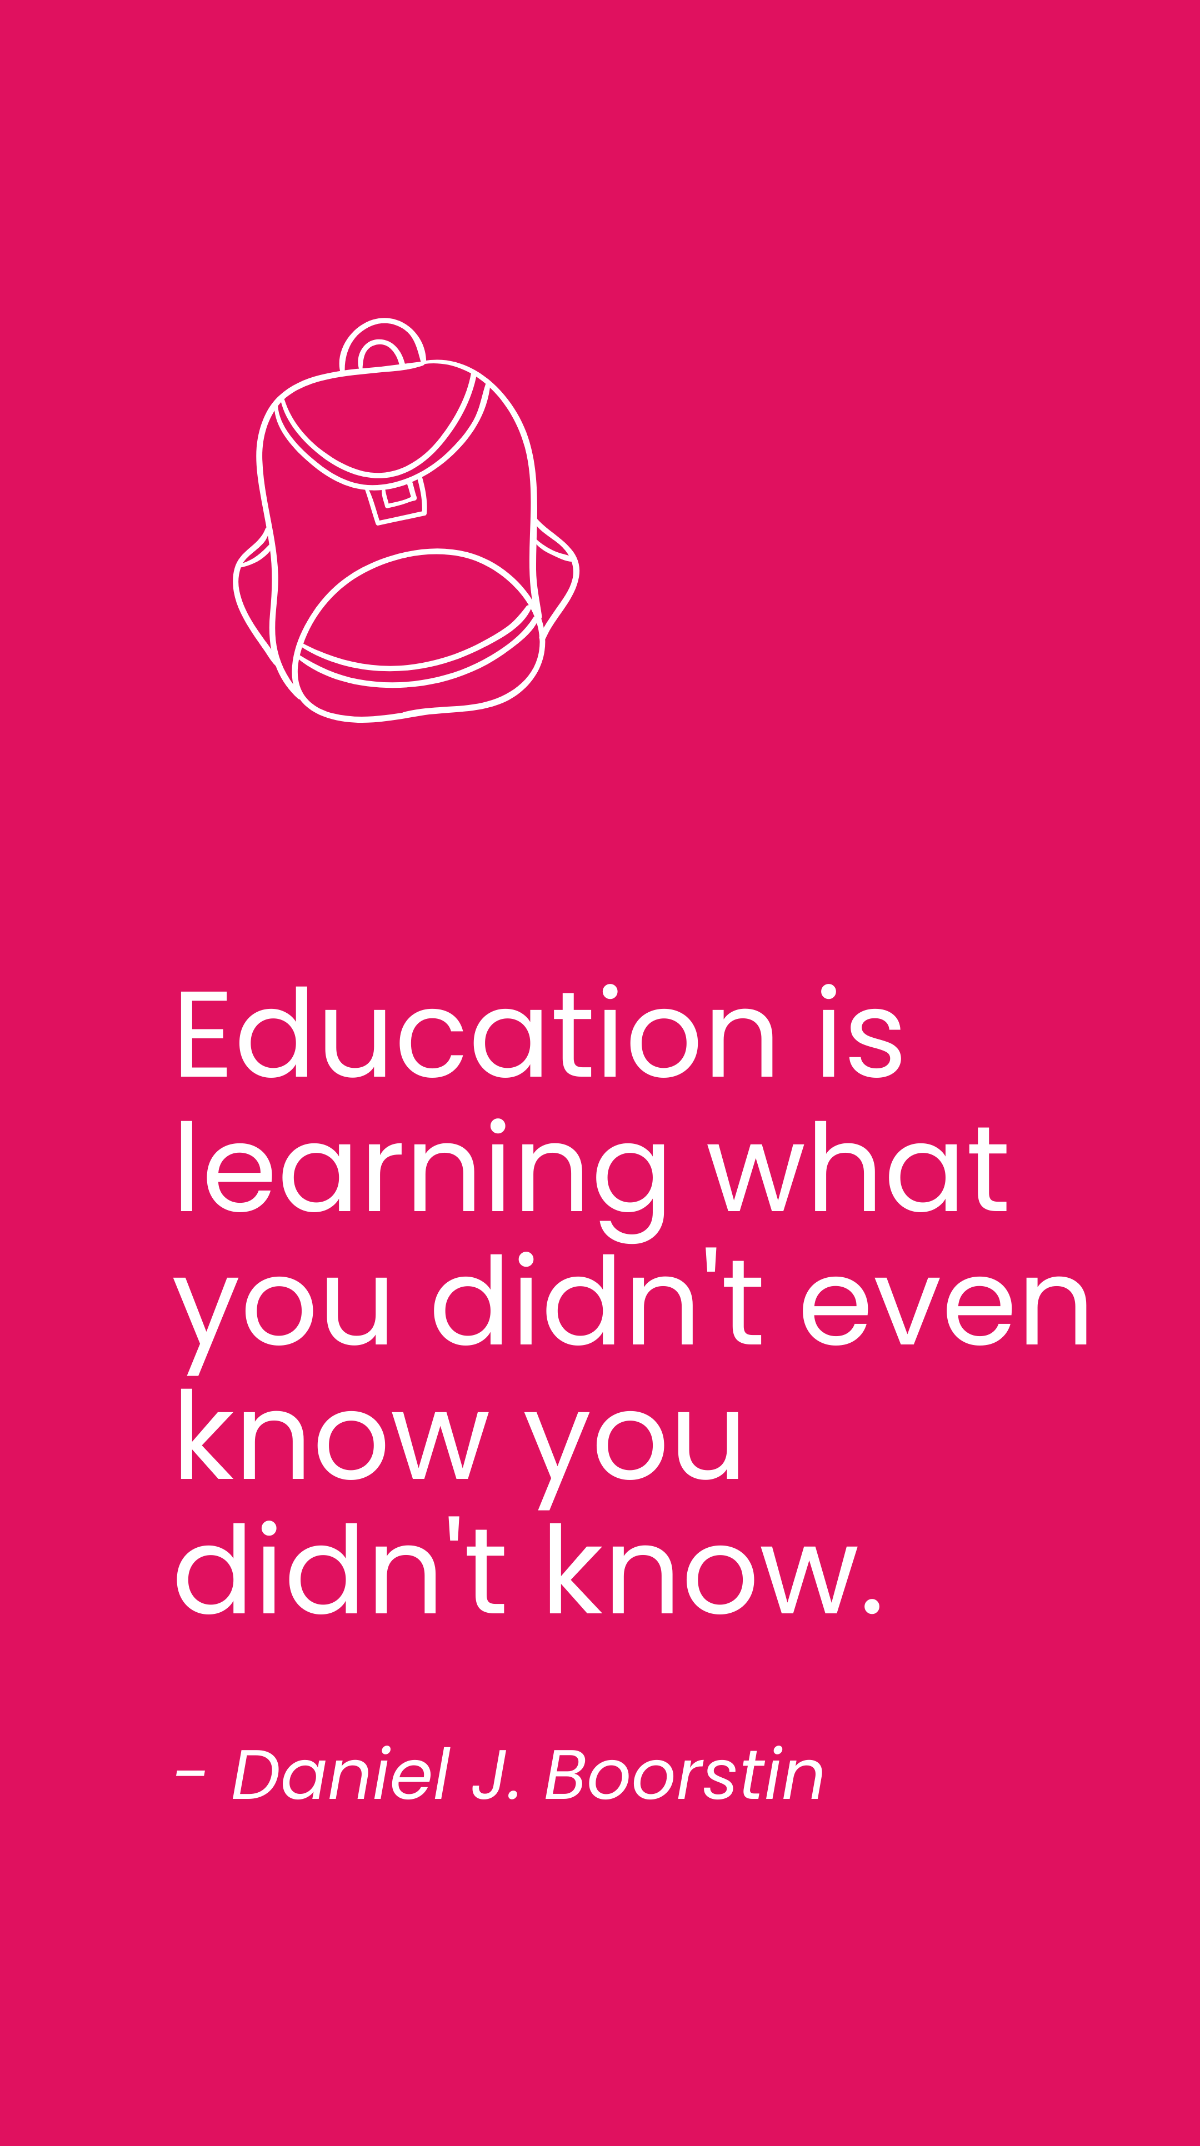 Free Daniel J. Boorstin - Education is learning what you didn't even know you didn't know. Template